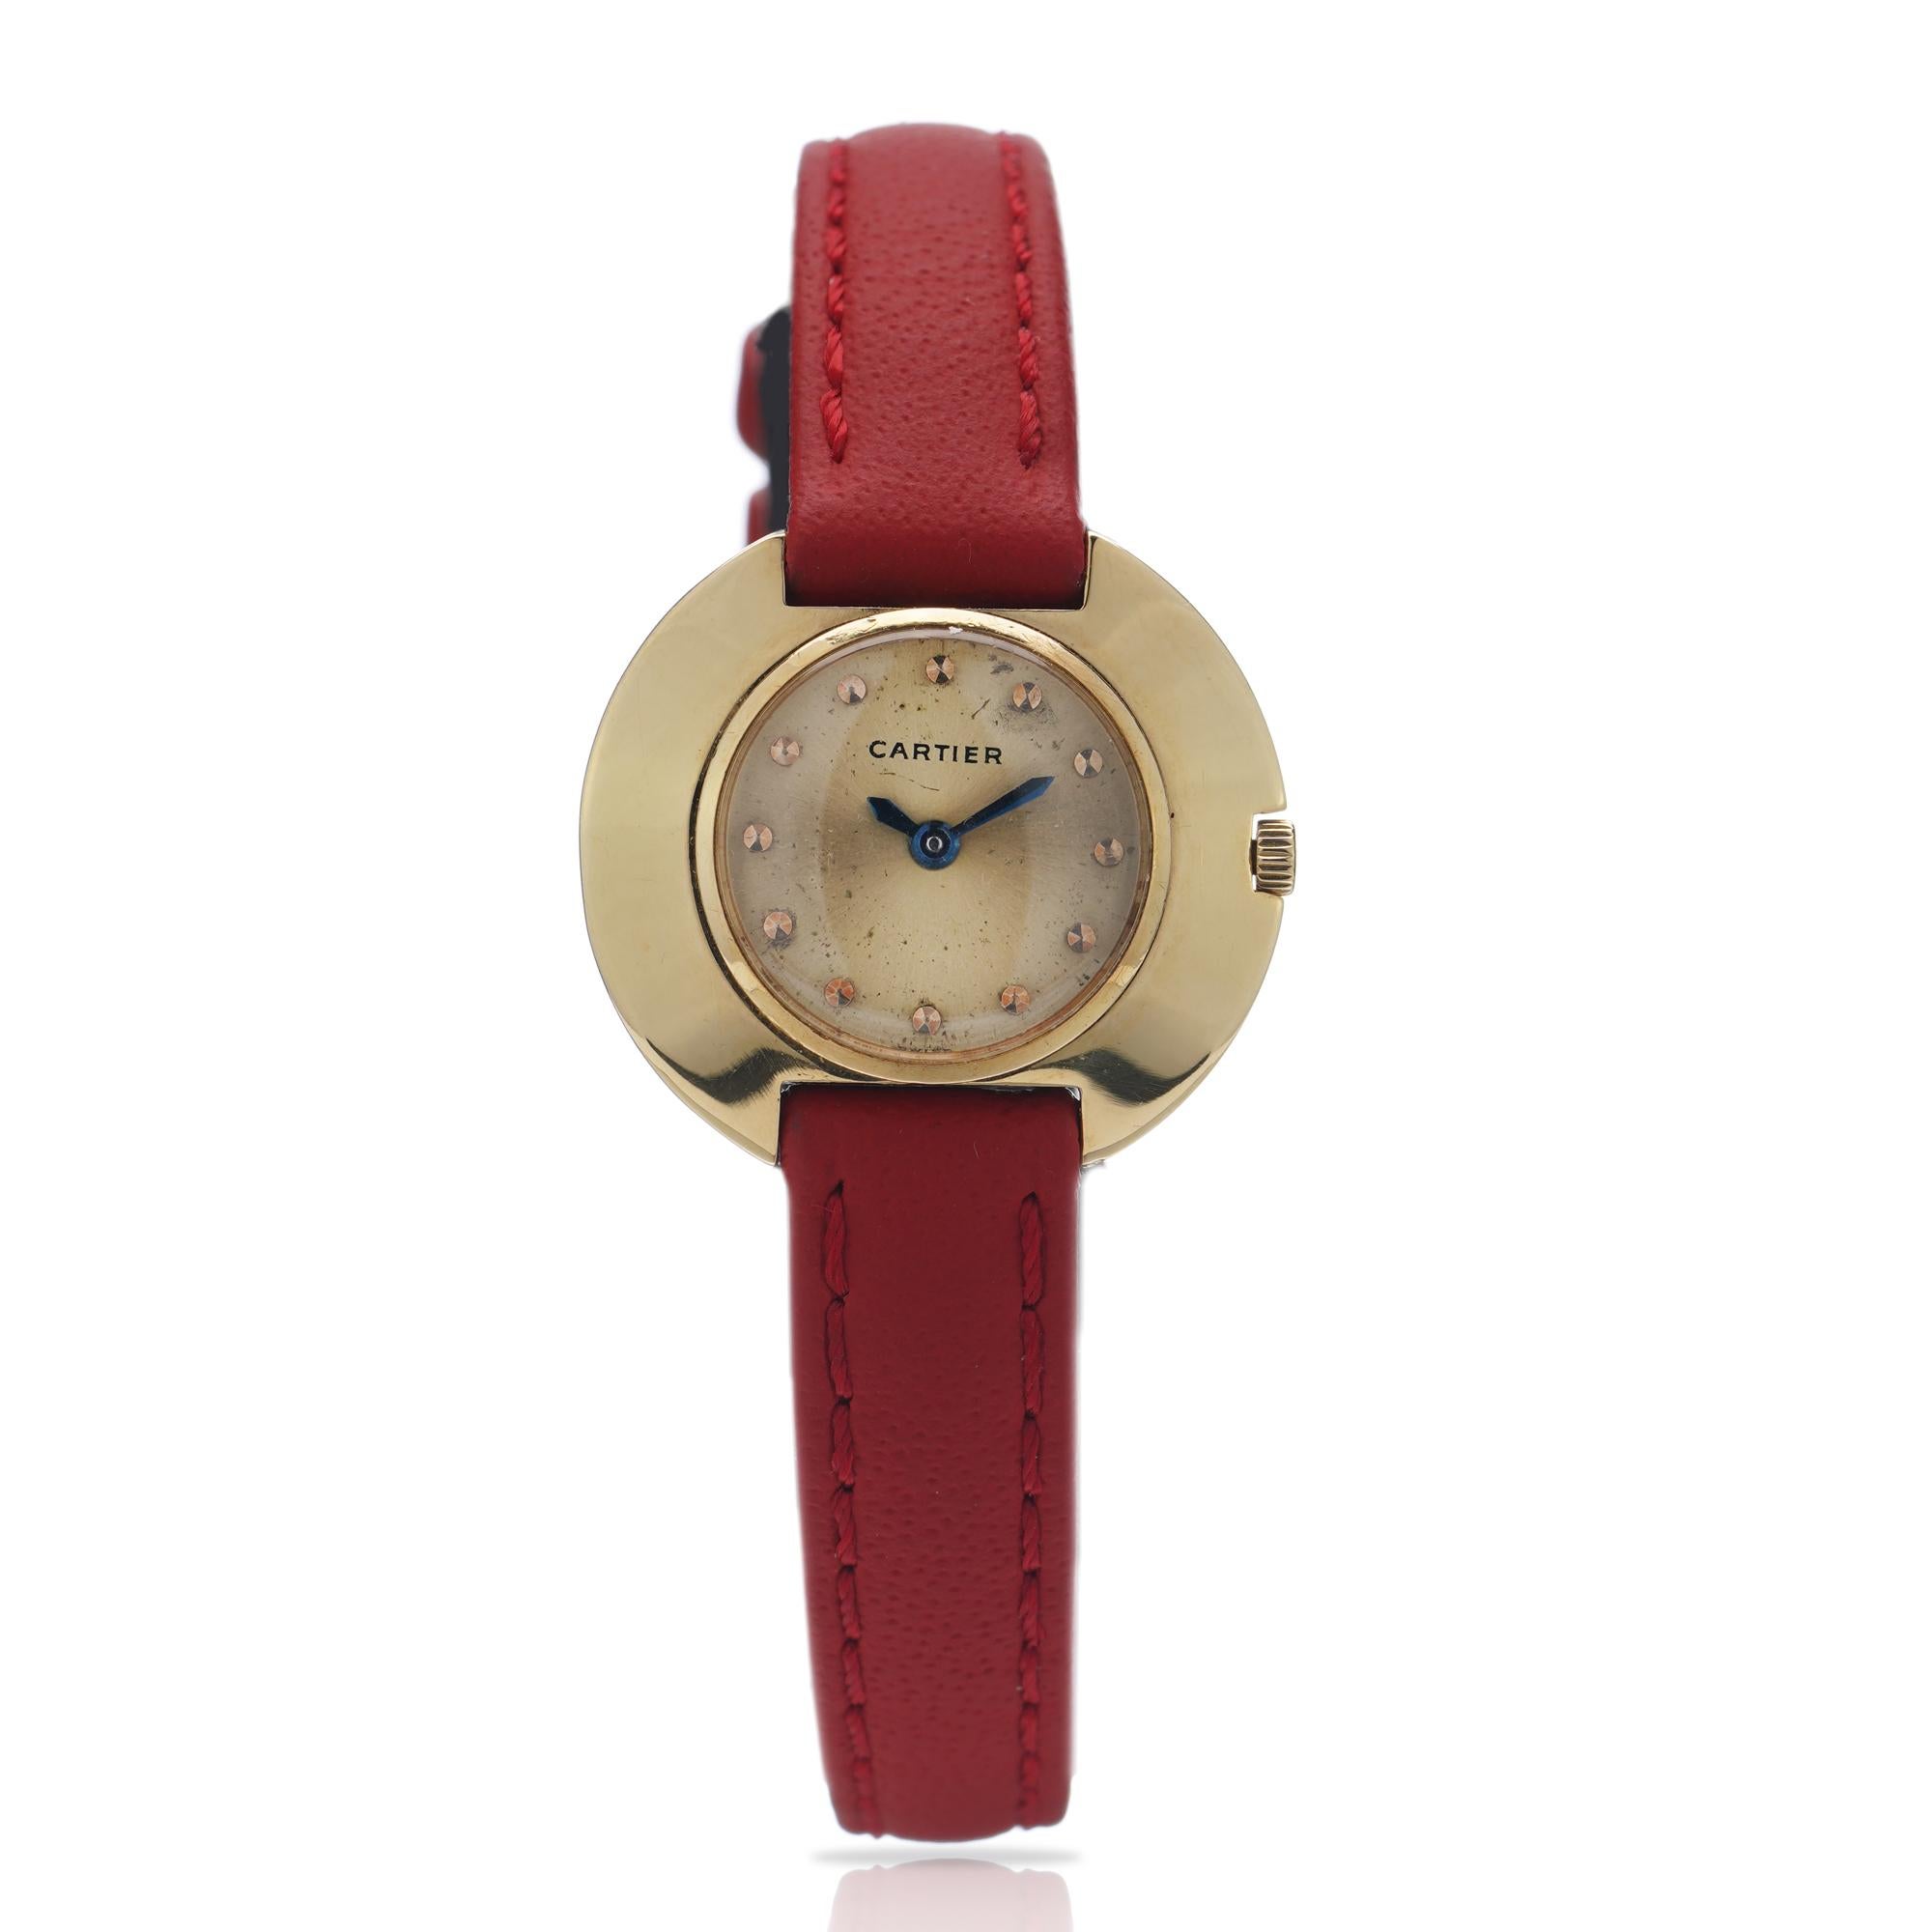 Cartier Vintage round ladies 18k. yellow gold wristwatch.
Made in Geneva, Ca.1950's 
Hallmarked with 750 ( A standard for 18kt. gold).  Genève. 

Gender: Woman
Case size: 25 mm
Movement: Manual winding
Watchband Material: red leather
Case material: